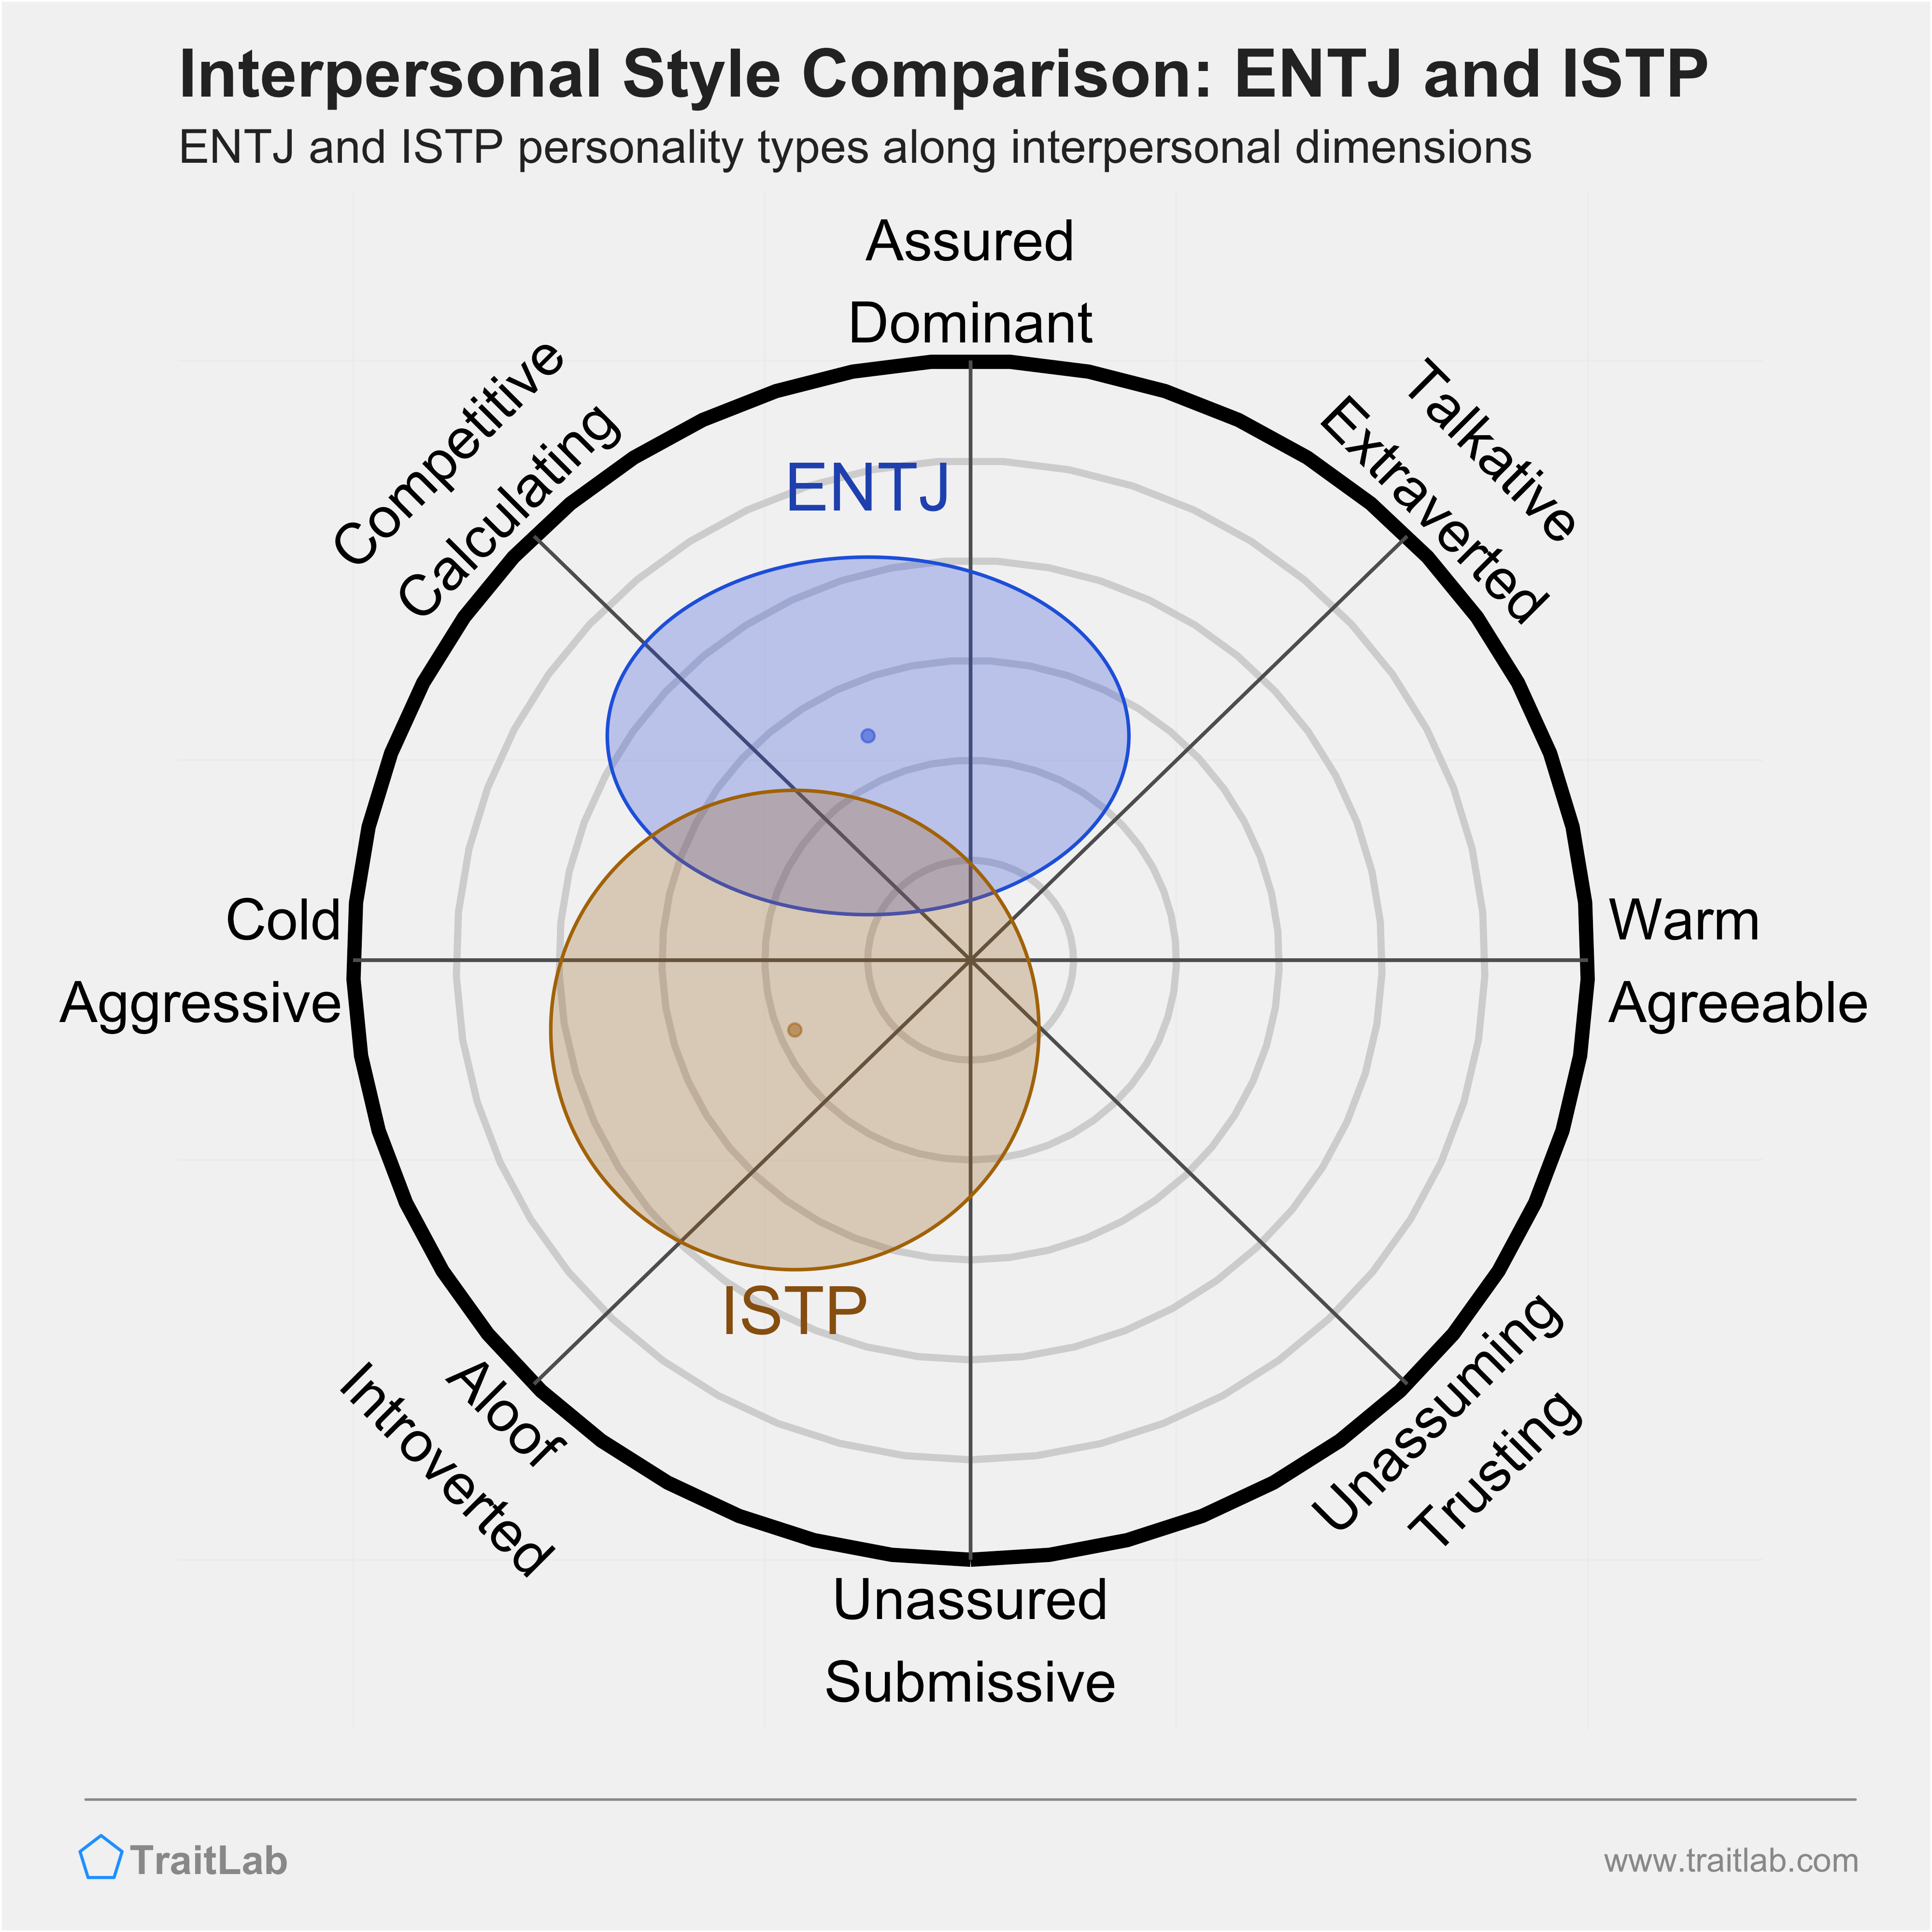 ENTJ and ISTP comparison across interpersonal dimensions